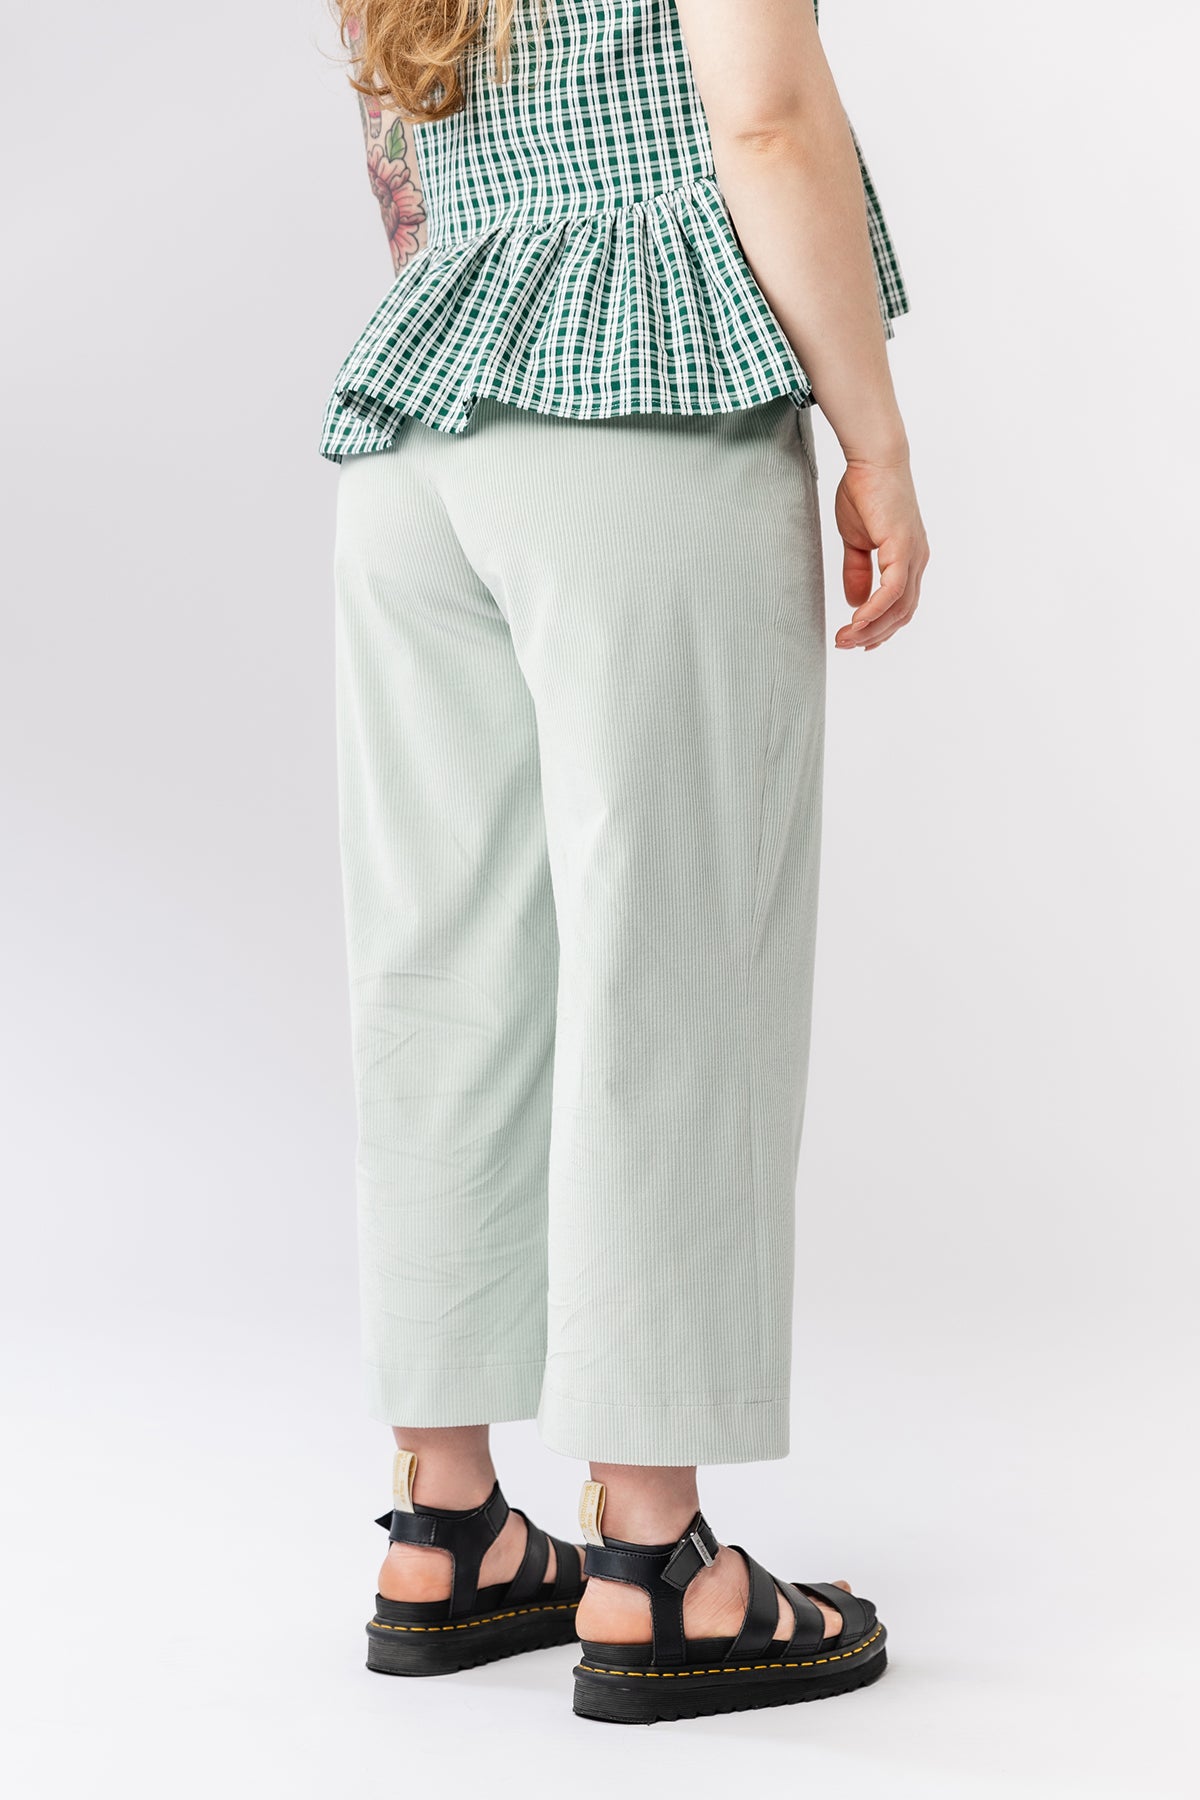 Named Verso Trousers and Shorts